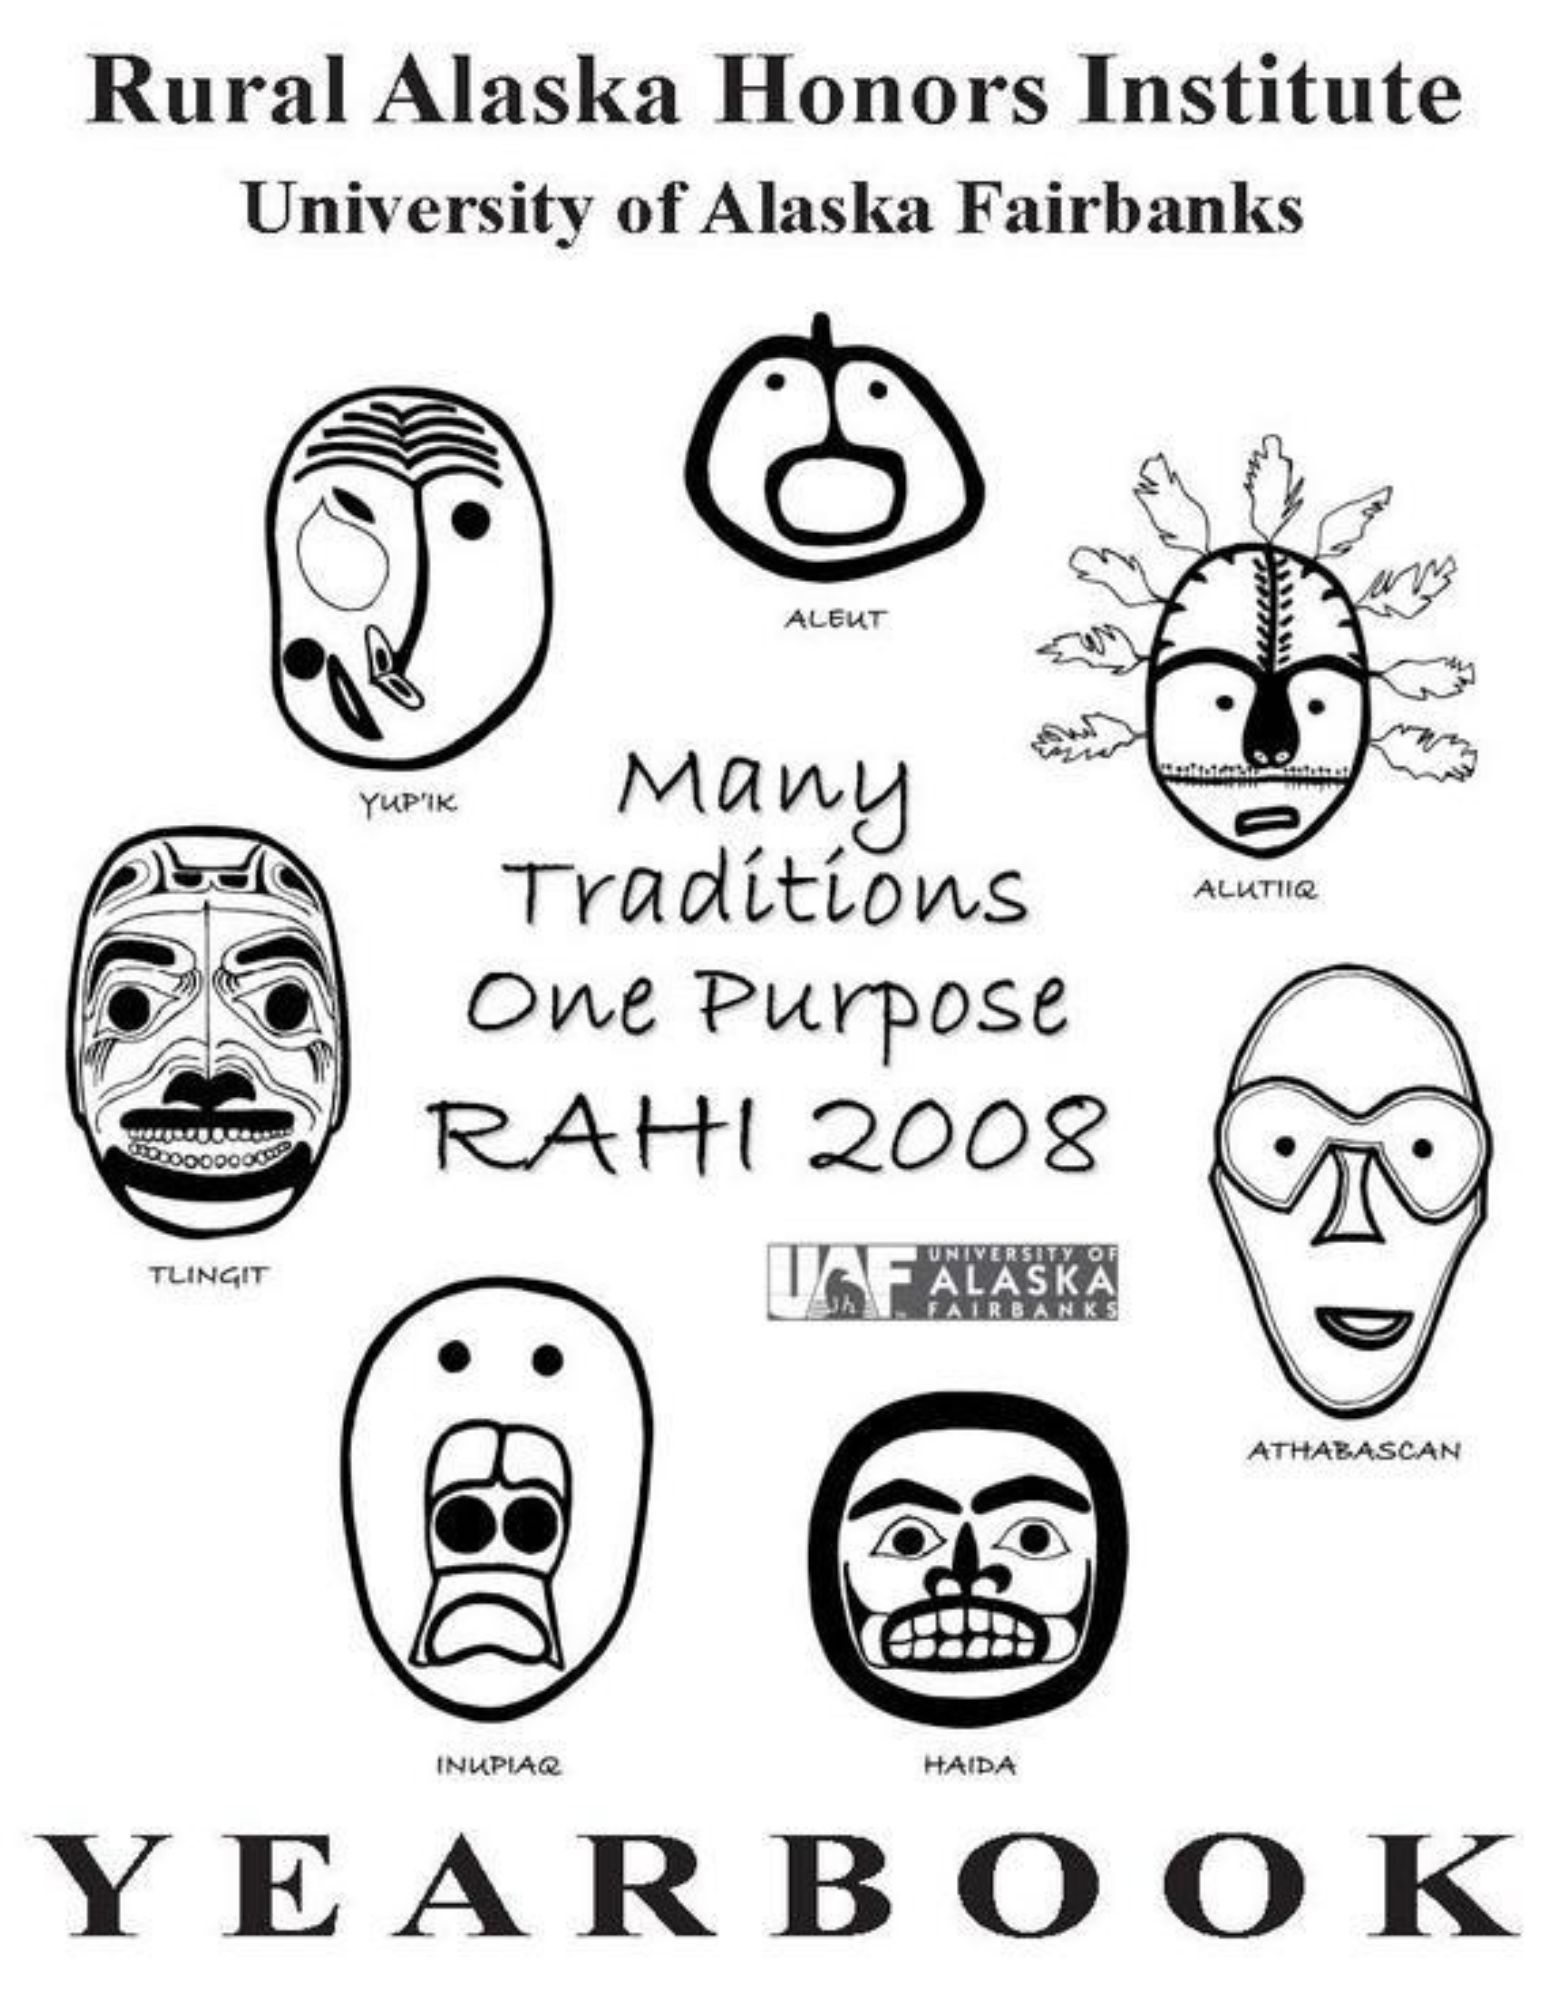 2008 Yearbook Cover